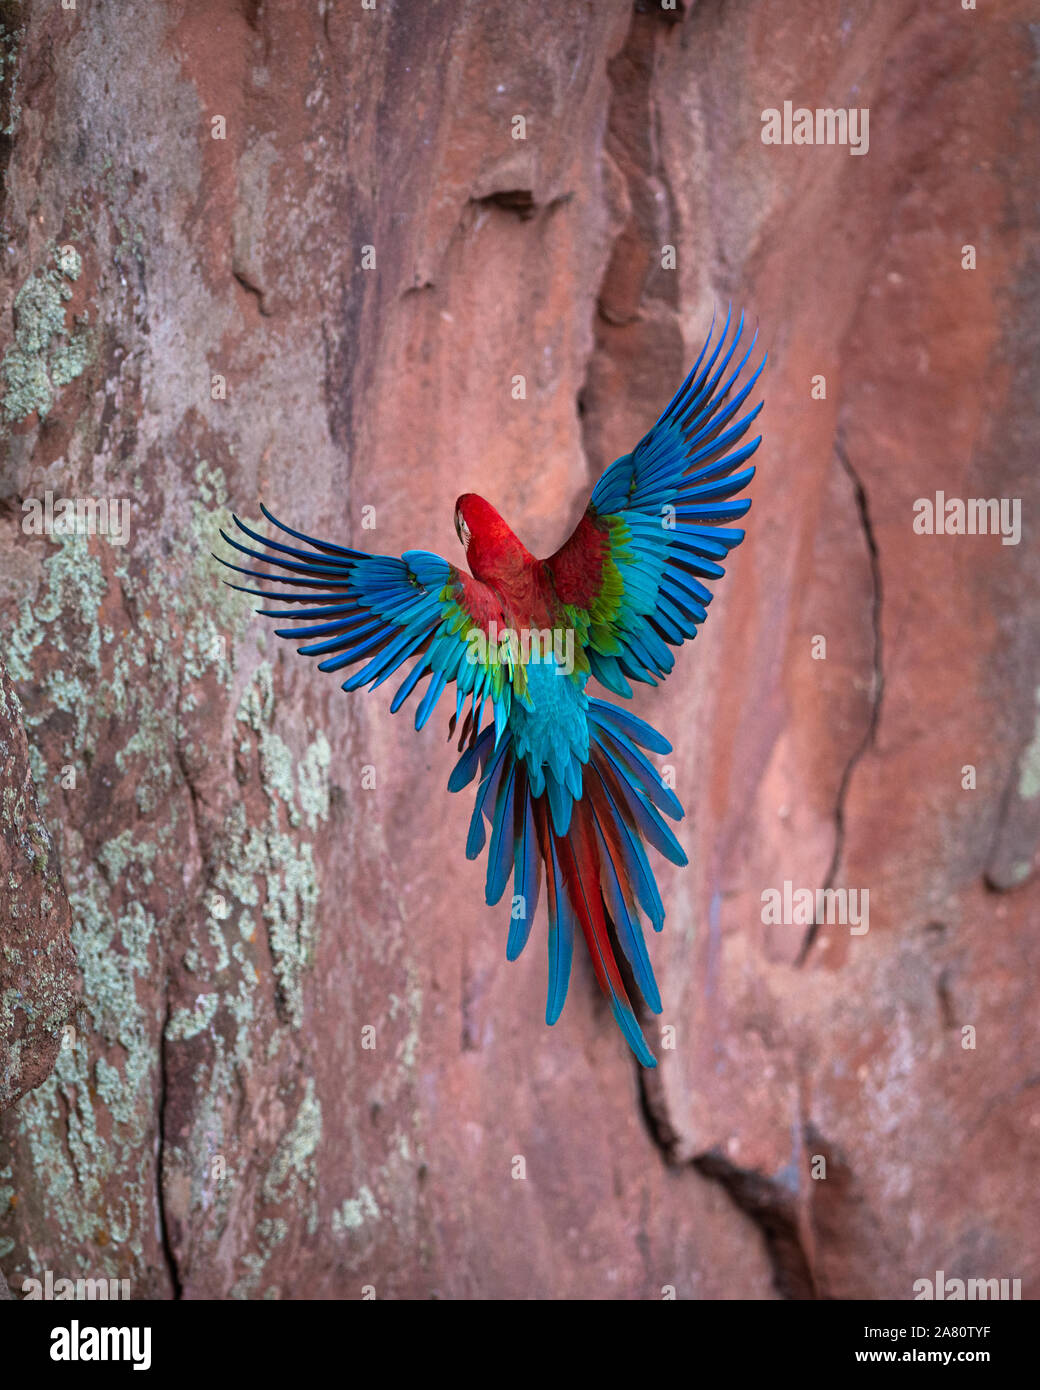 A Red-and-green Macaw about to perch at a sandstone wall in Central Brazil Stock Photo